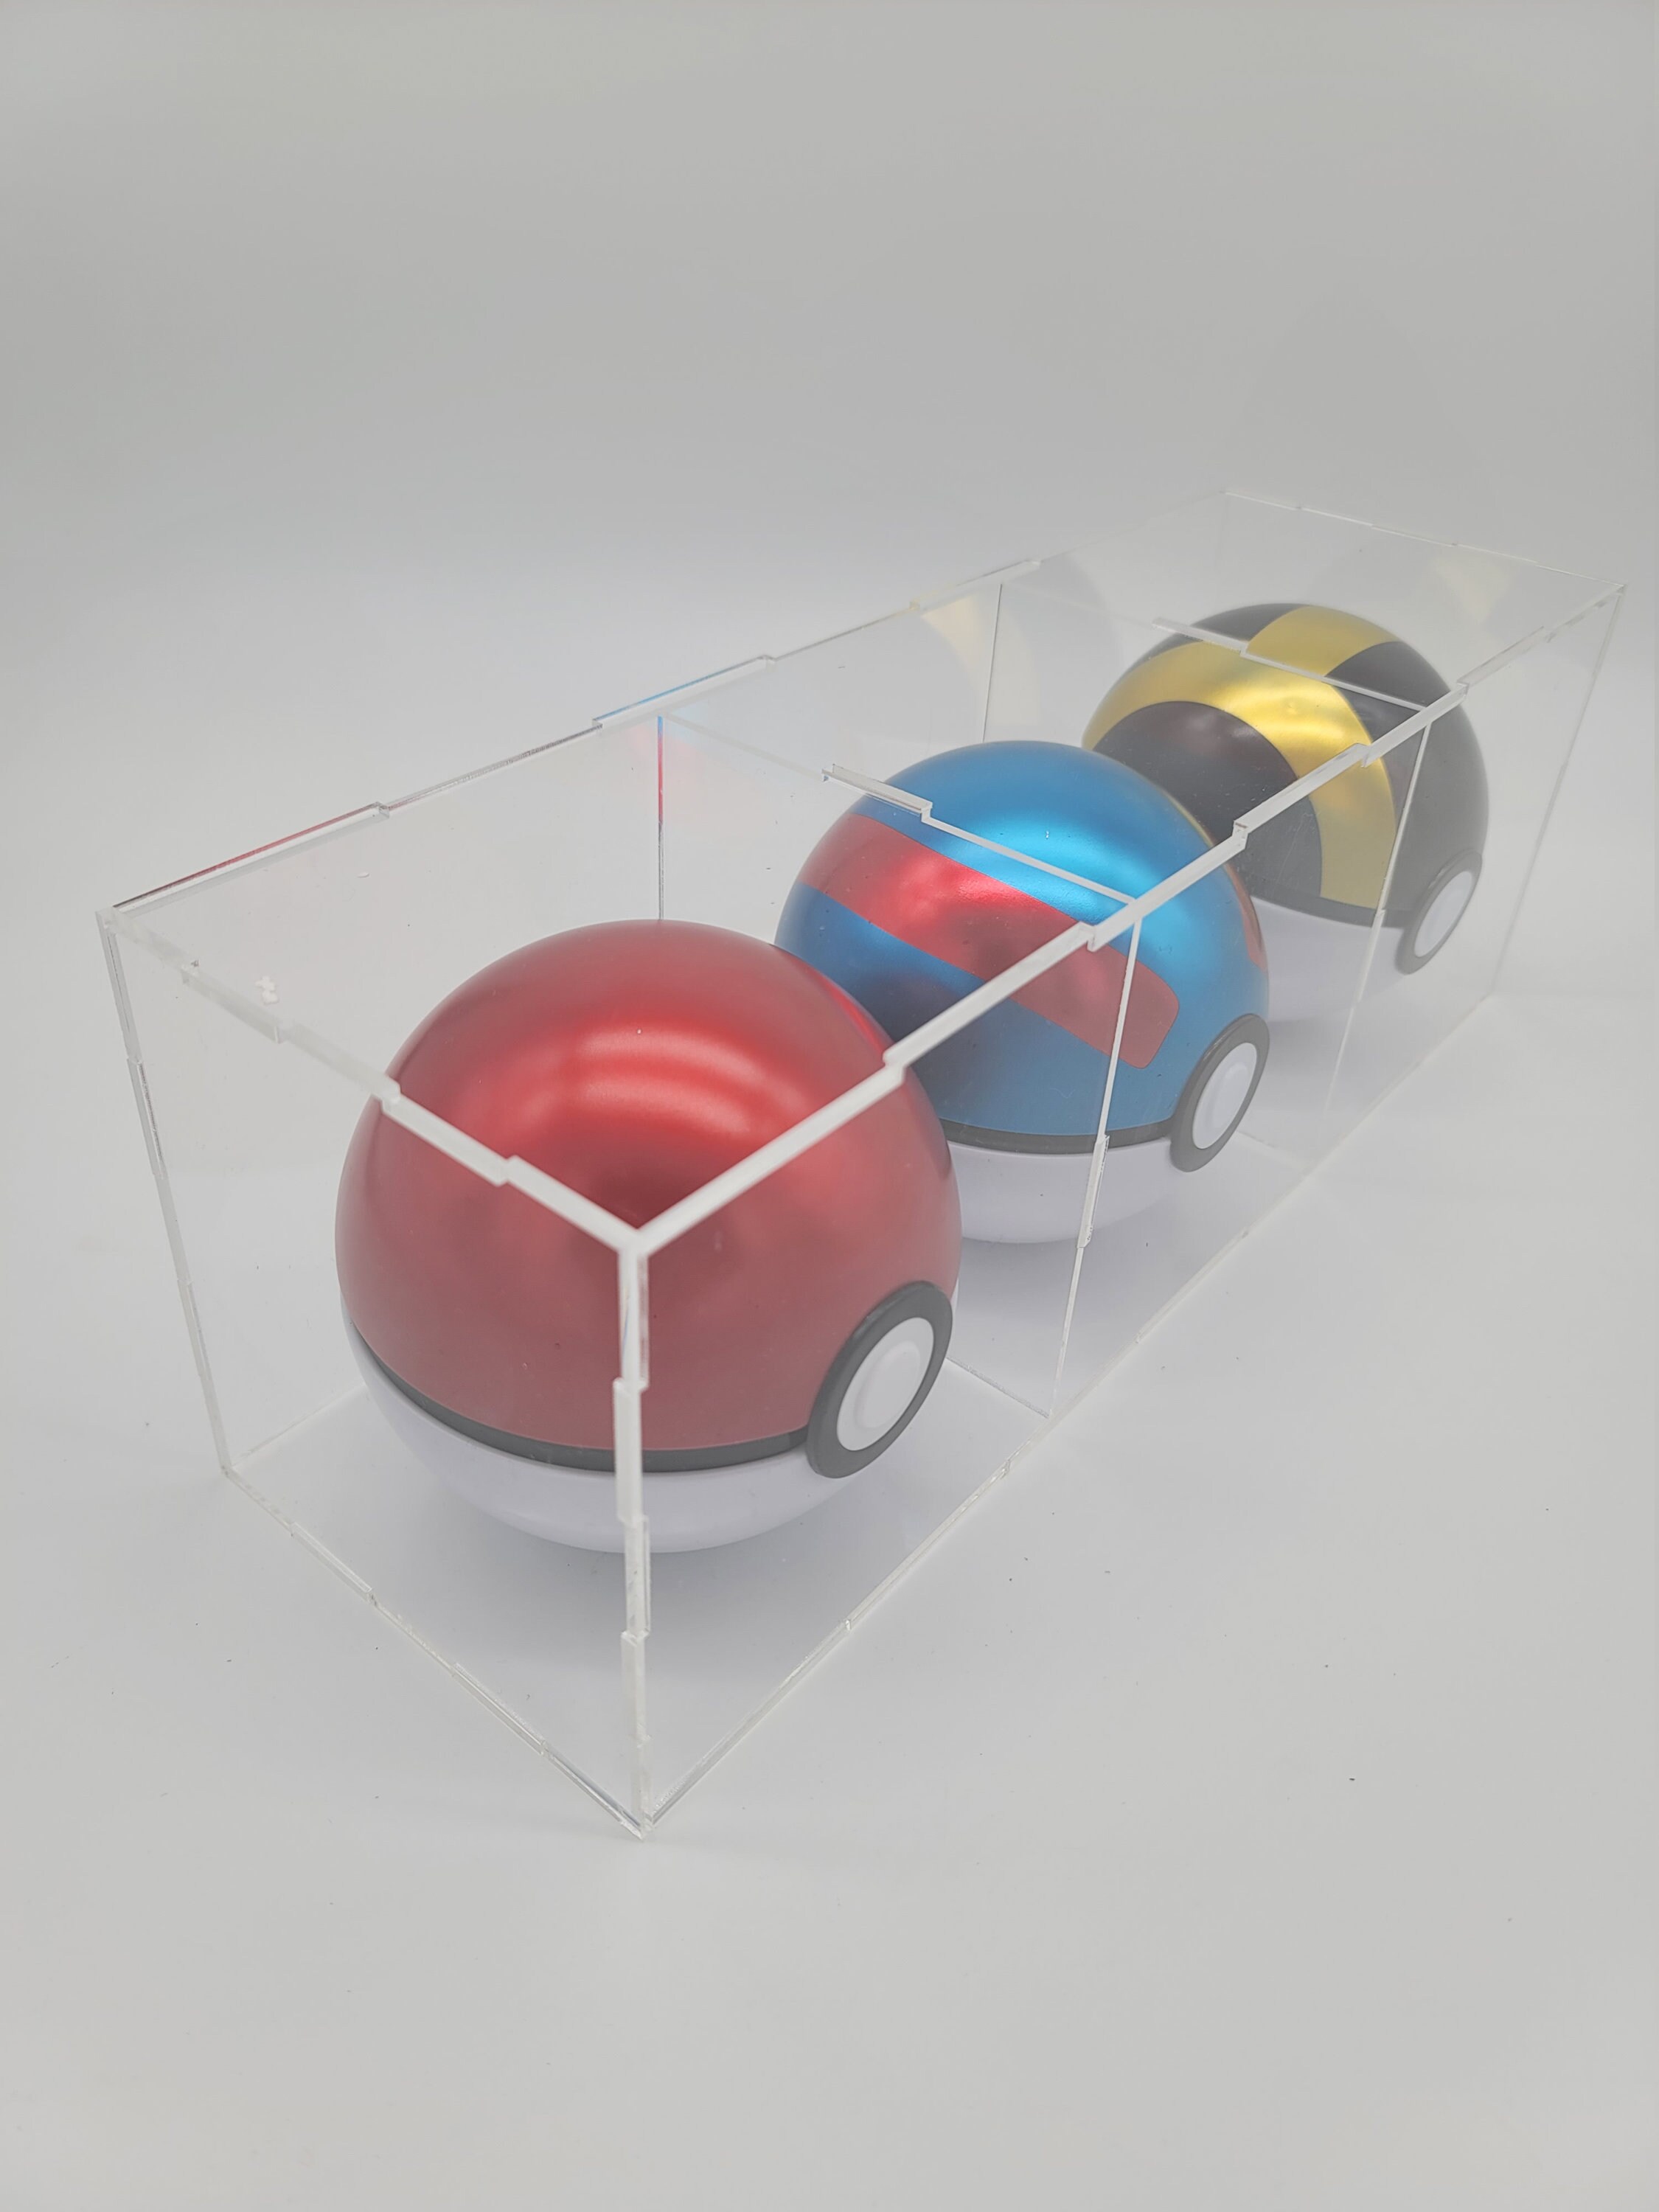 Details about   Pokemon Pokeball 3 Pack Acrylic Display Case Box Framing/Display Quality Grade 